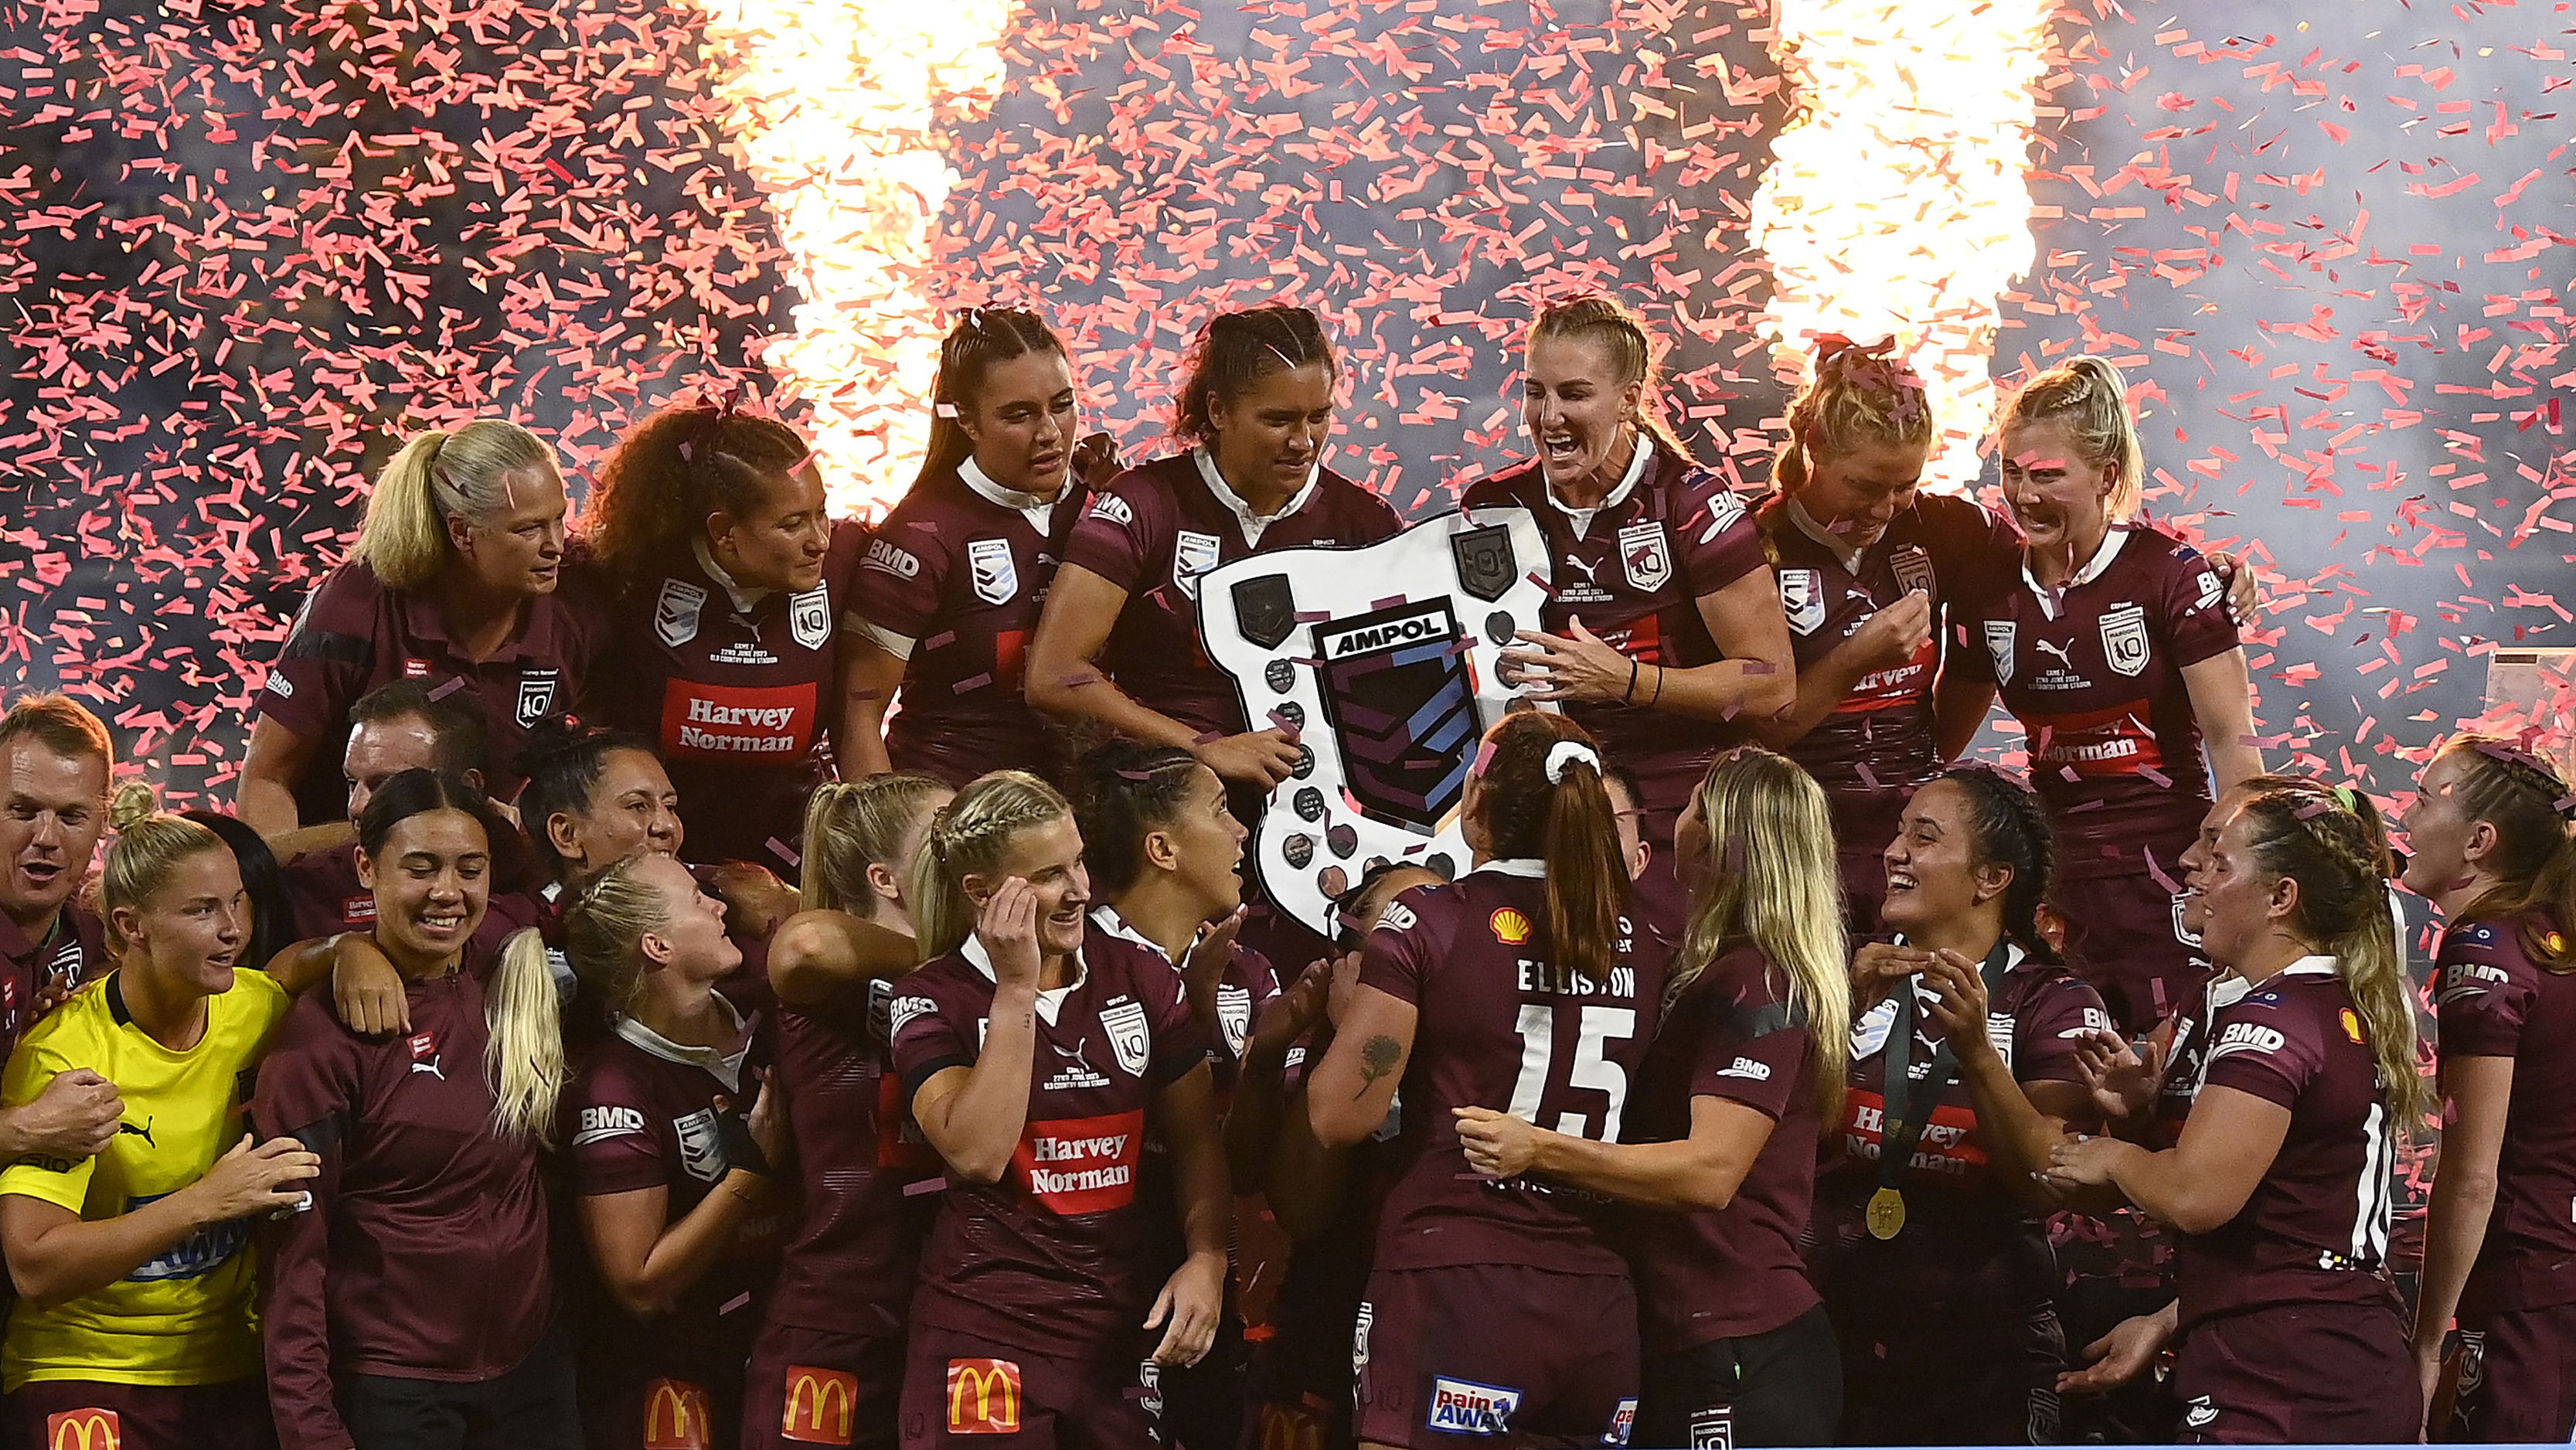 TOWNSVILLE, AUSTRALIA - JUNE 22: Queensland celebrates after winning the series during game two of the women&#x27;s state of origin series between New South Wales Skyblues and Queensland Maroons at Queensland Country Bank Stadium on June 22, 2023 in Townsville, Australia. (Photo by Ian Hitchcock/Getty Images)